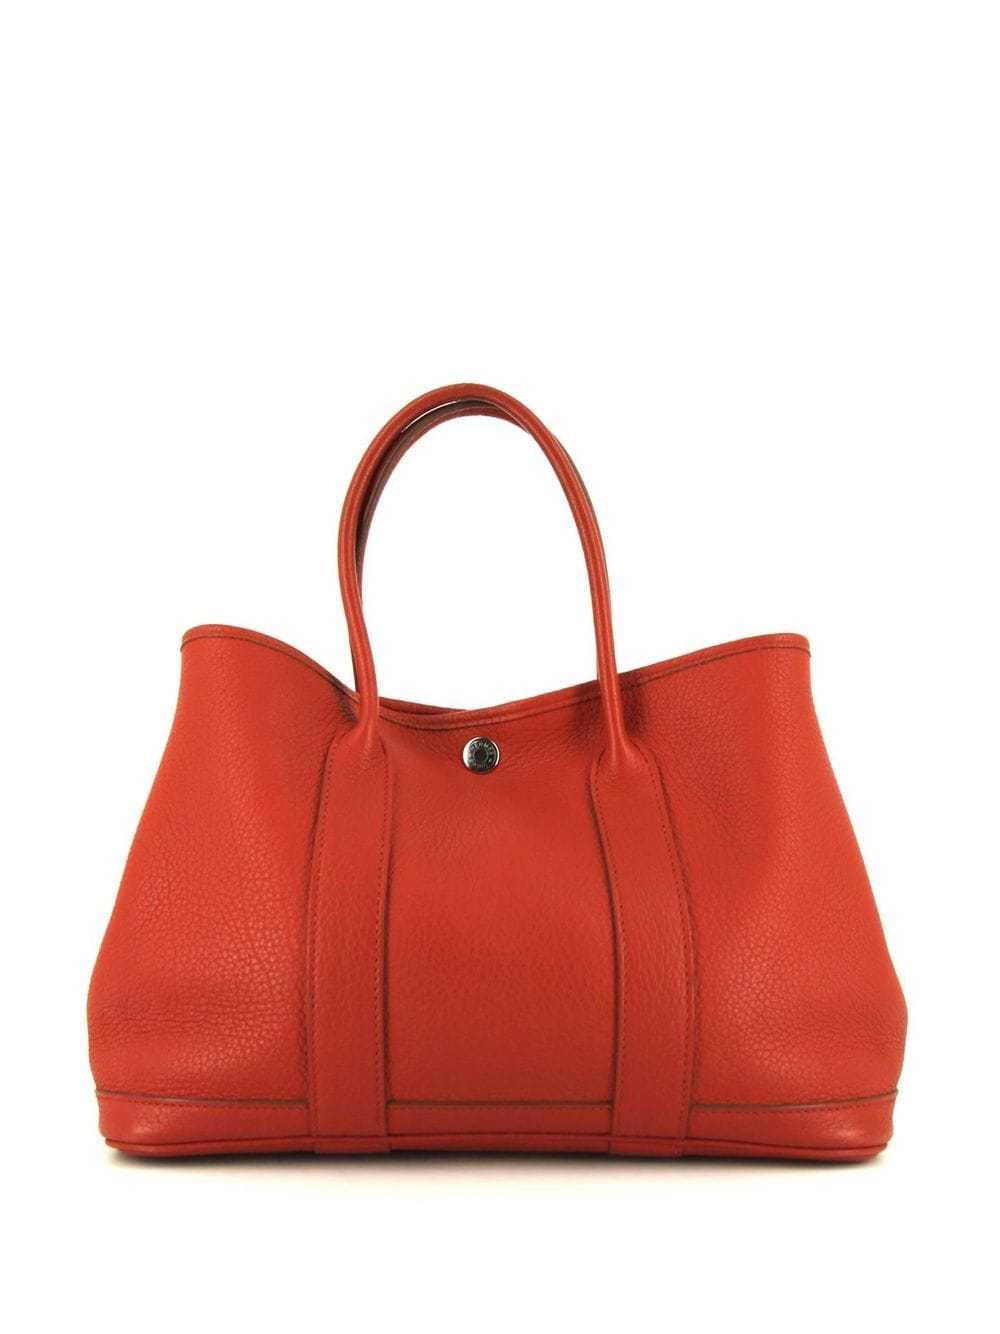 Hermès Pre-Owned 2013 Garden Party tote bag - Red - image 1